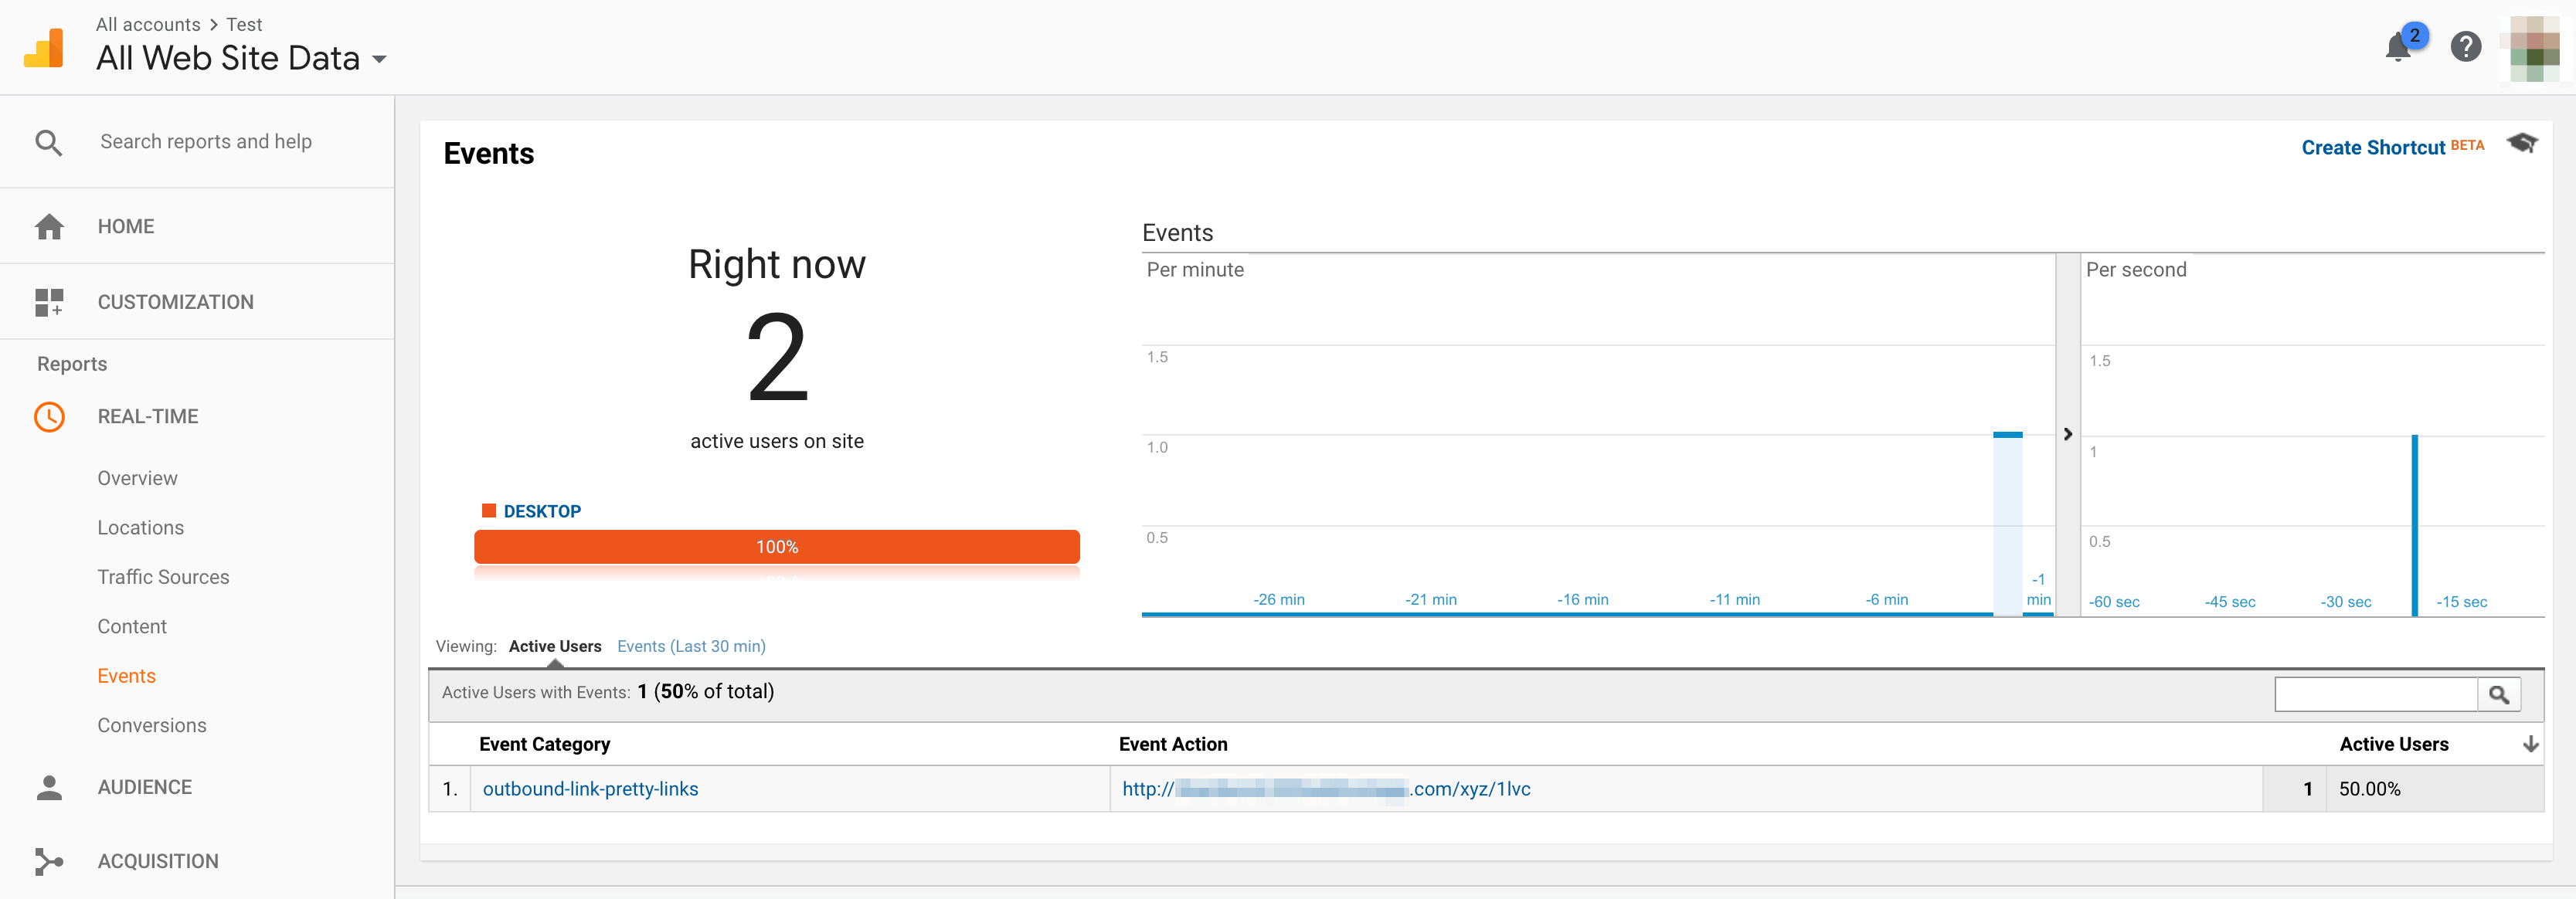 Google Analytics real-time results showing a link click.